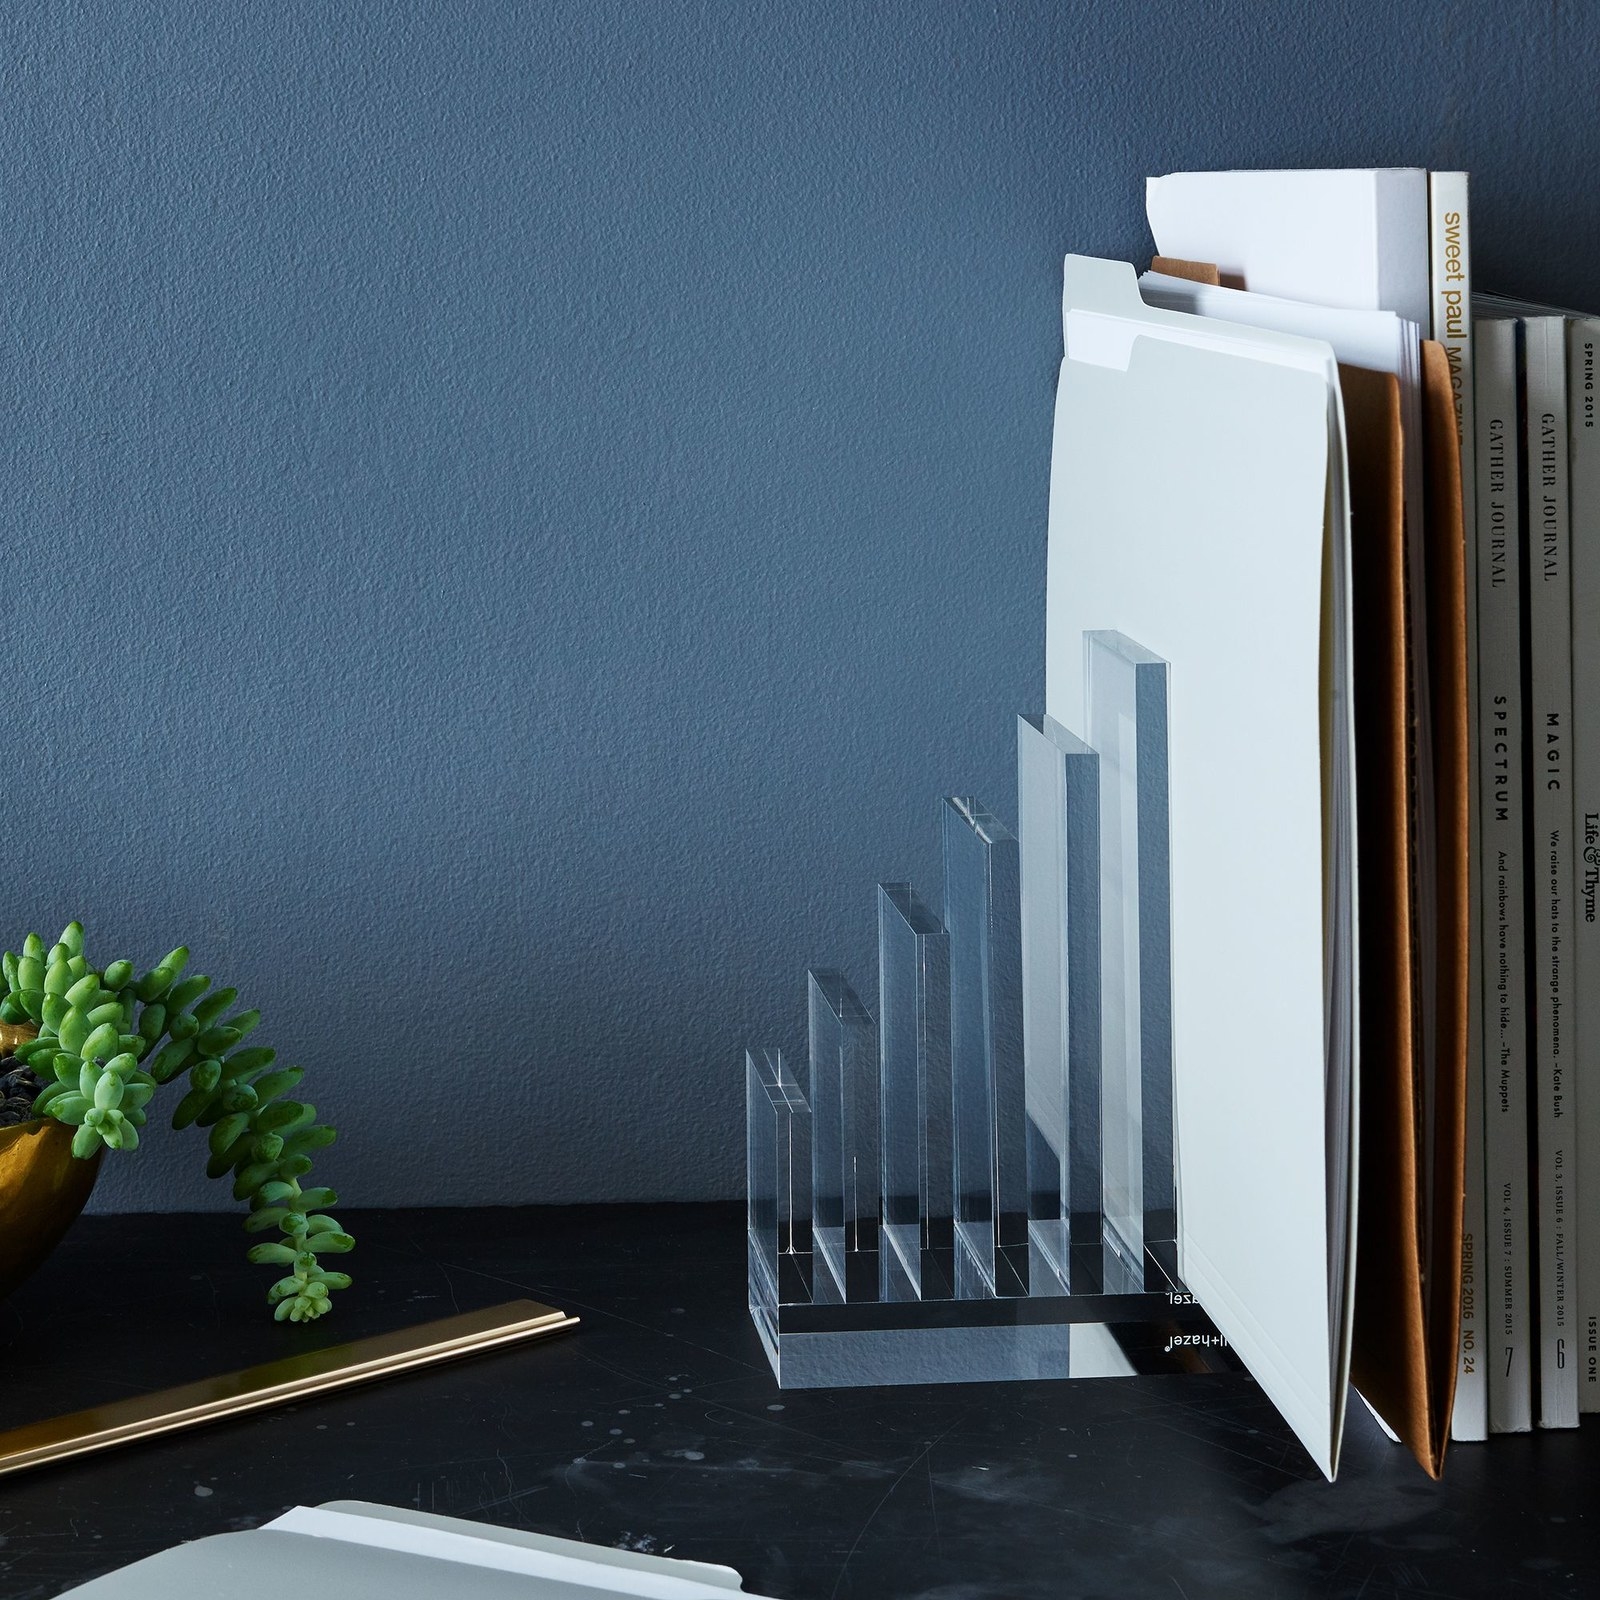 the acrylic bookends holding various files and magazines